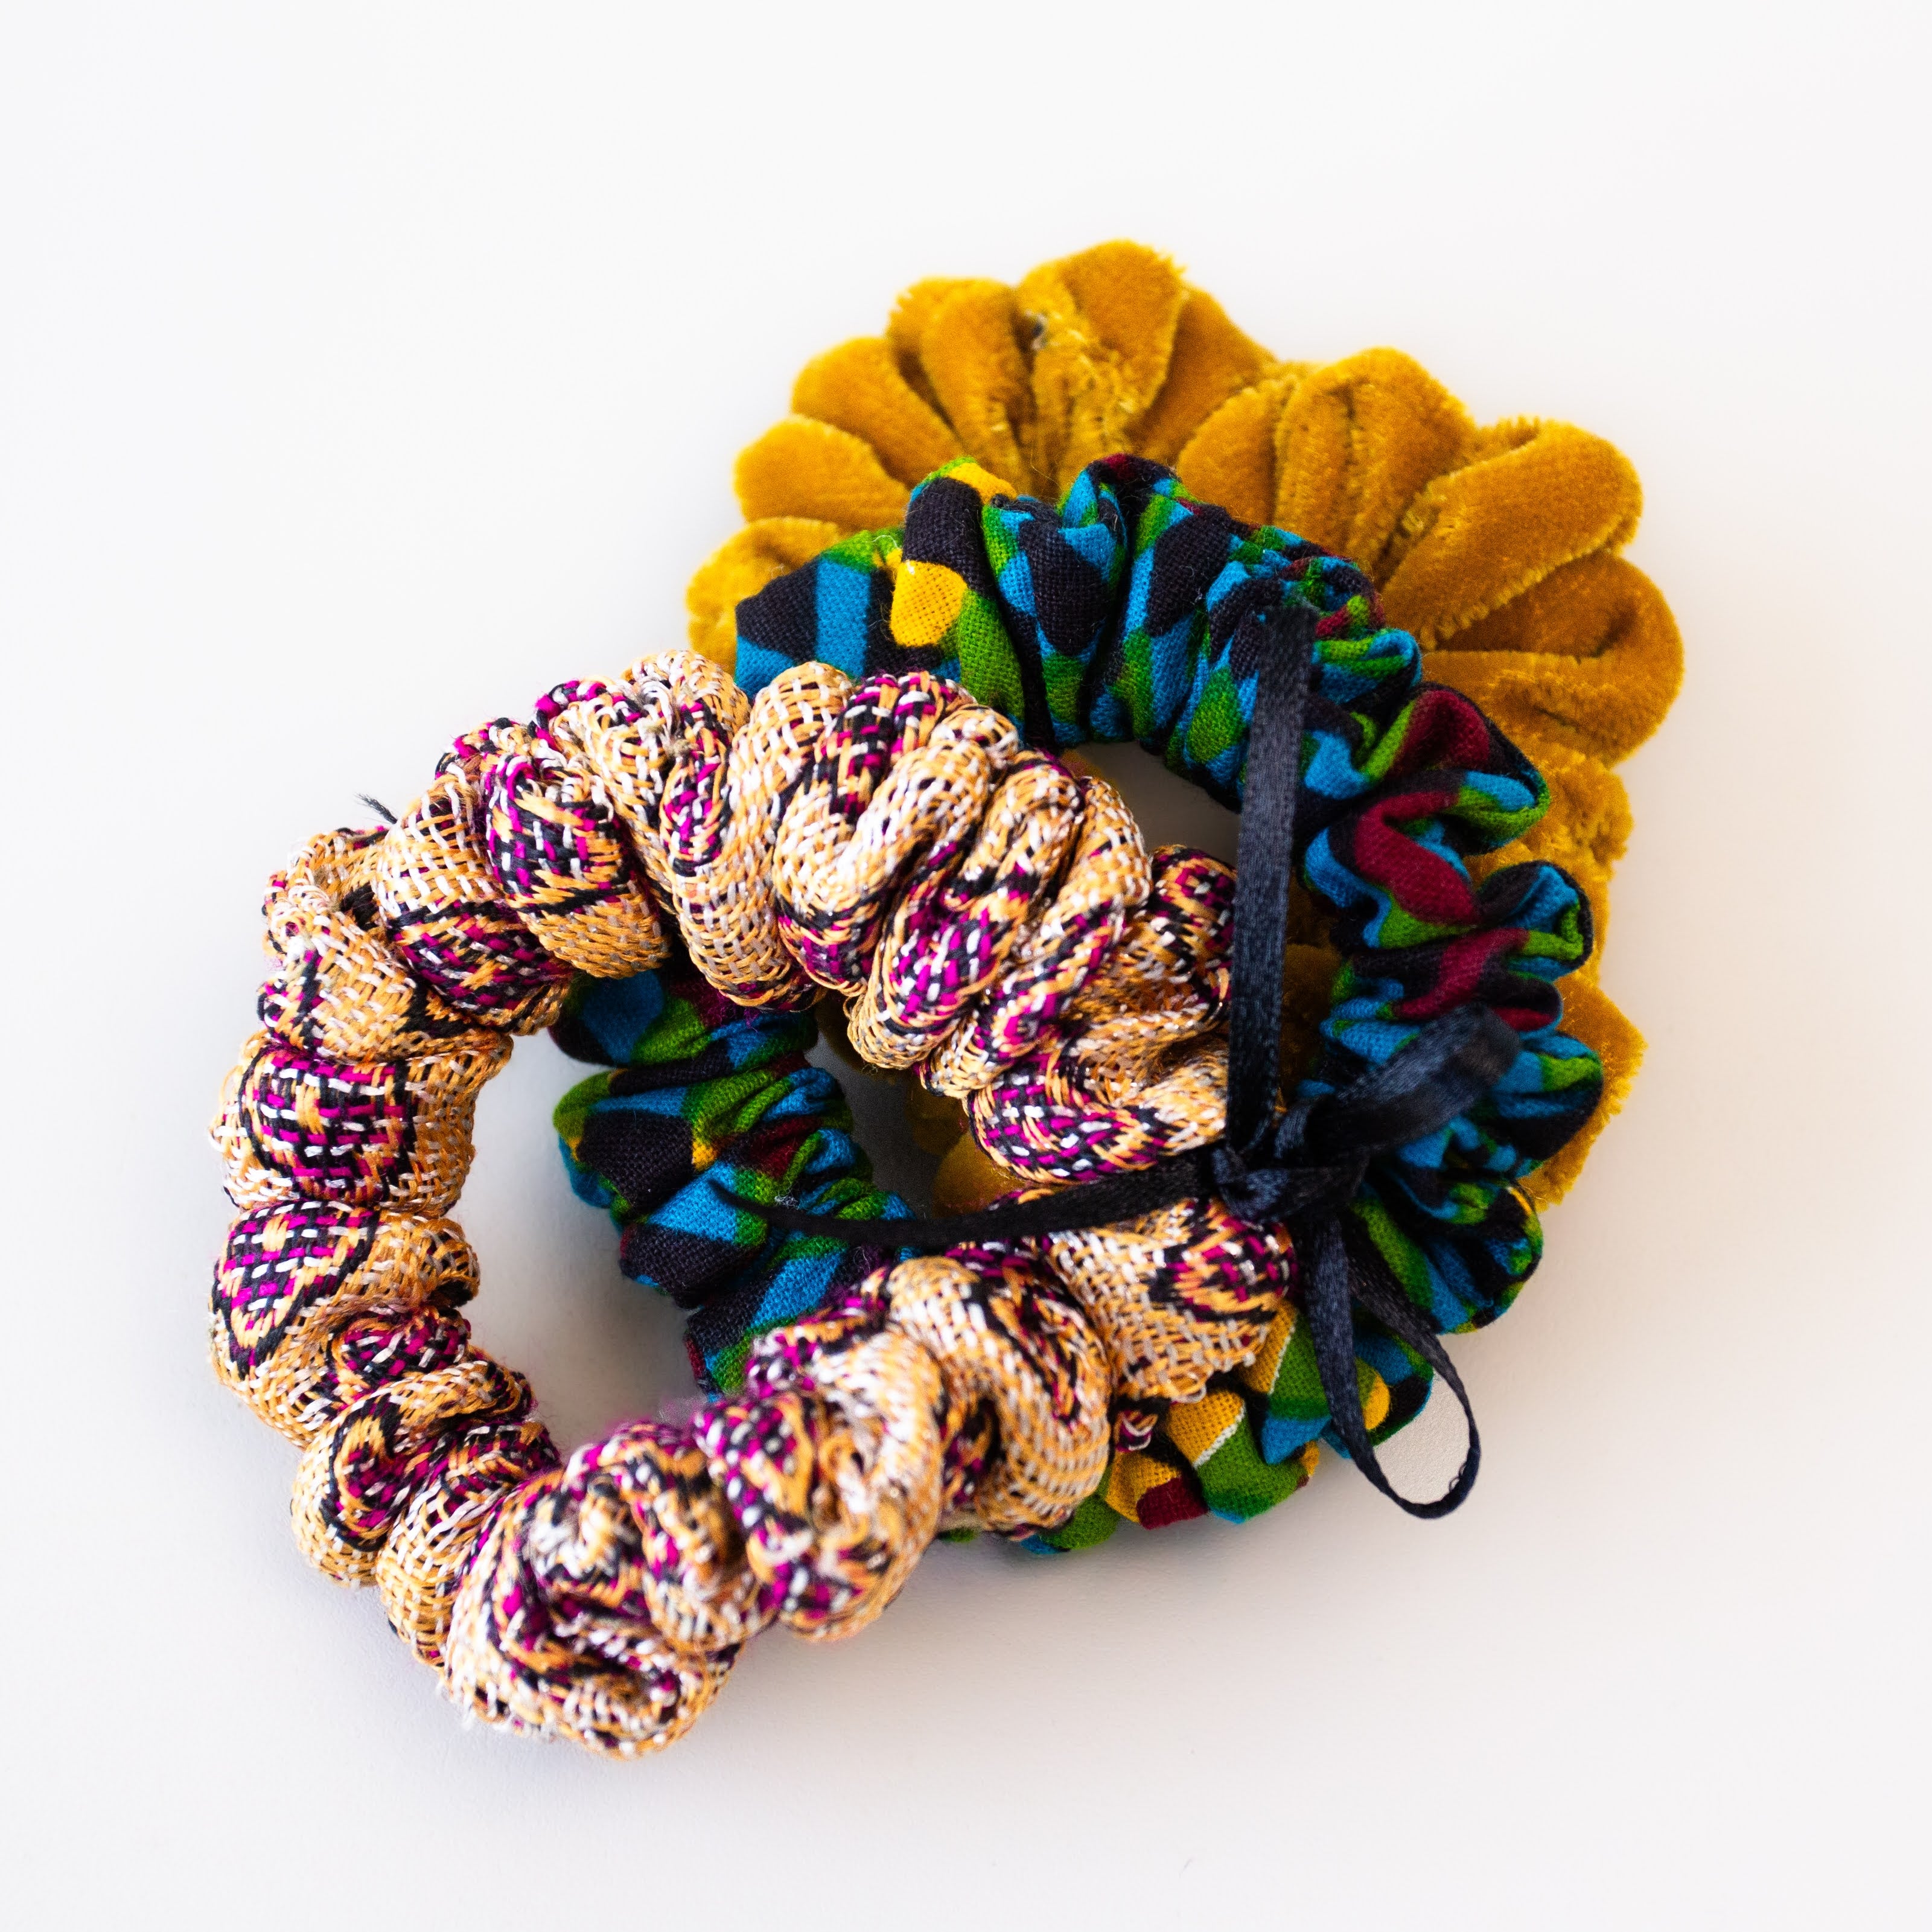 Scrunchie Set - handmade by the women of Amani using Kenyan materials for a Fair Trade boutique